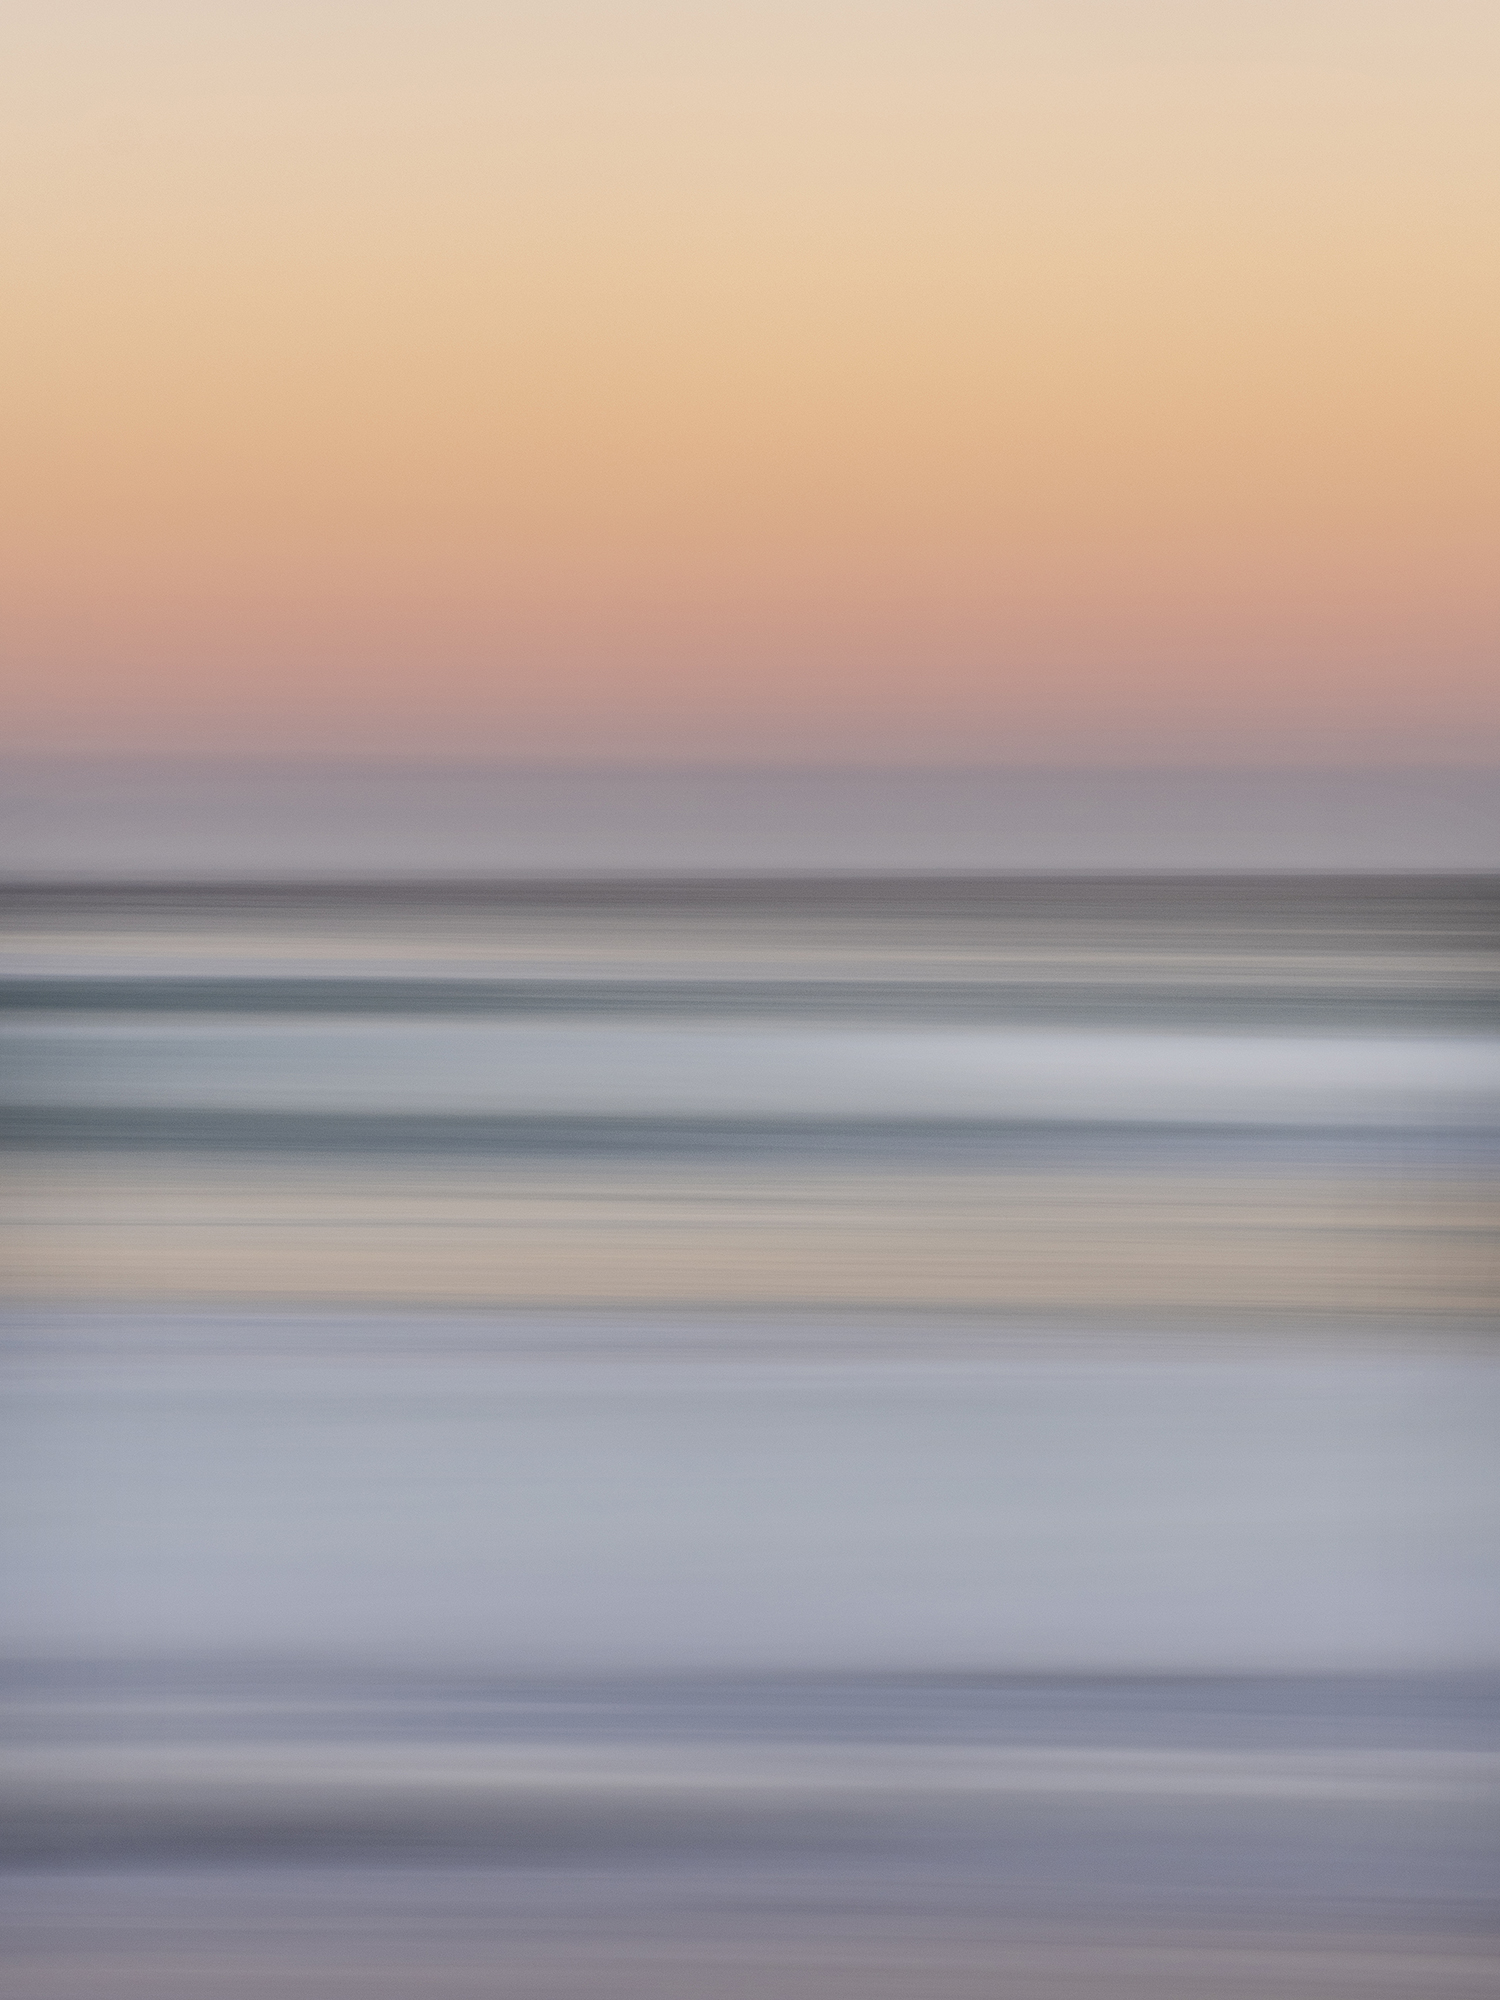 ICM Photography example of a beach scene at sunset